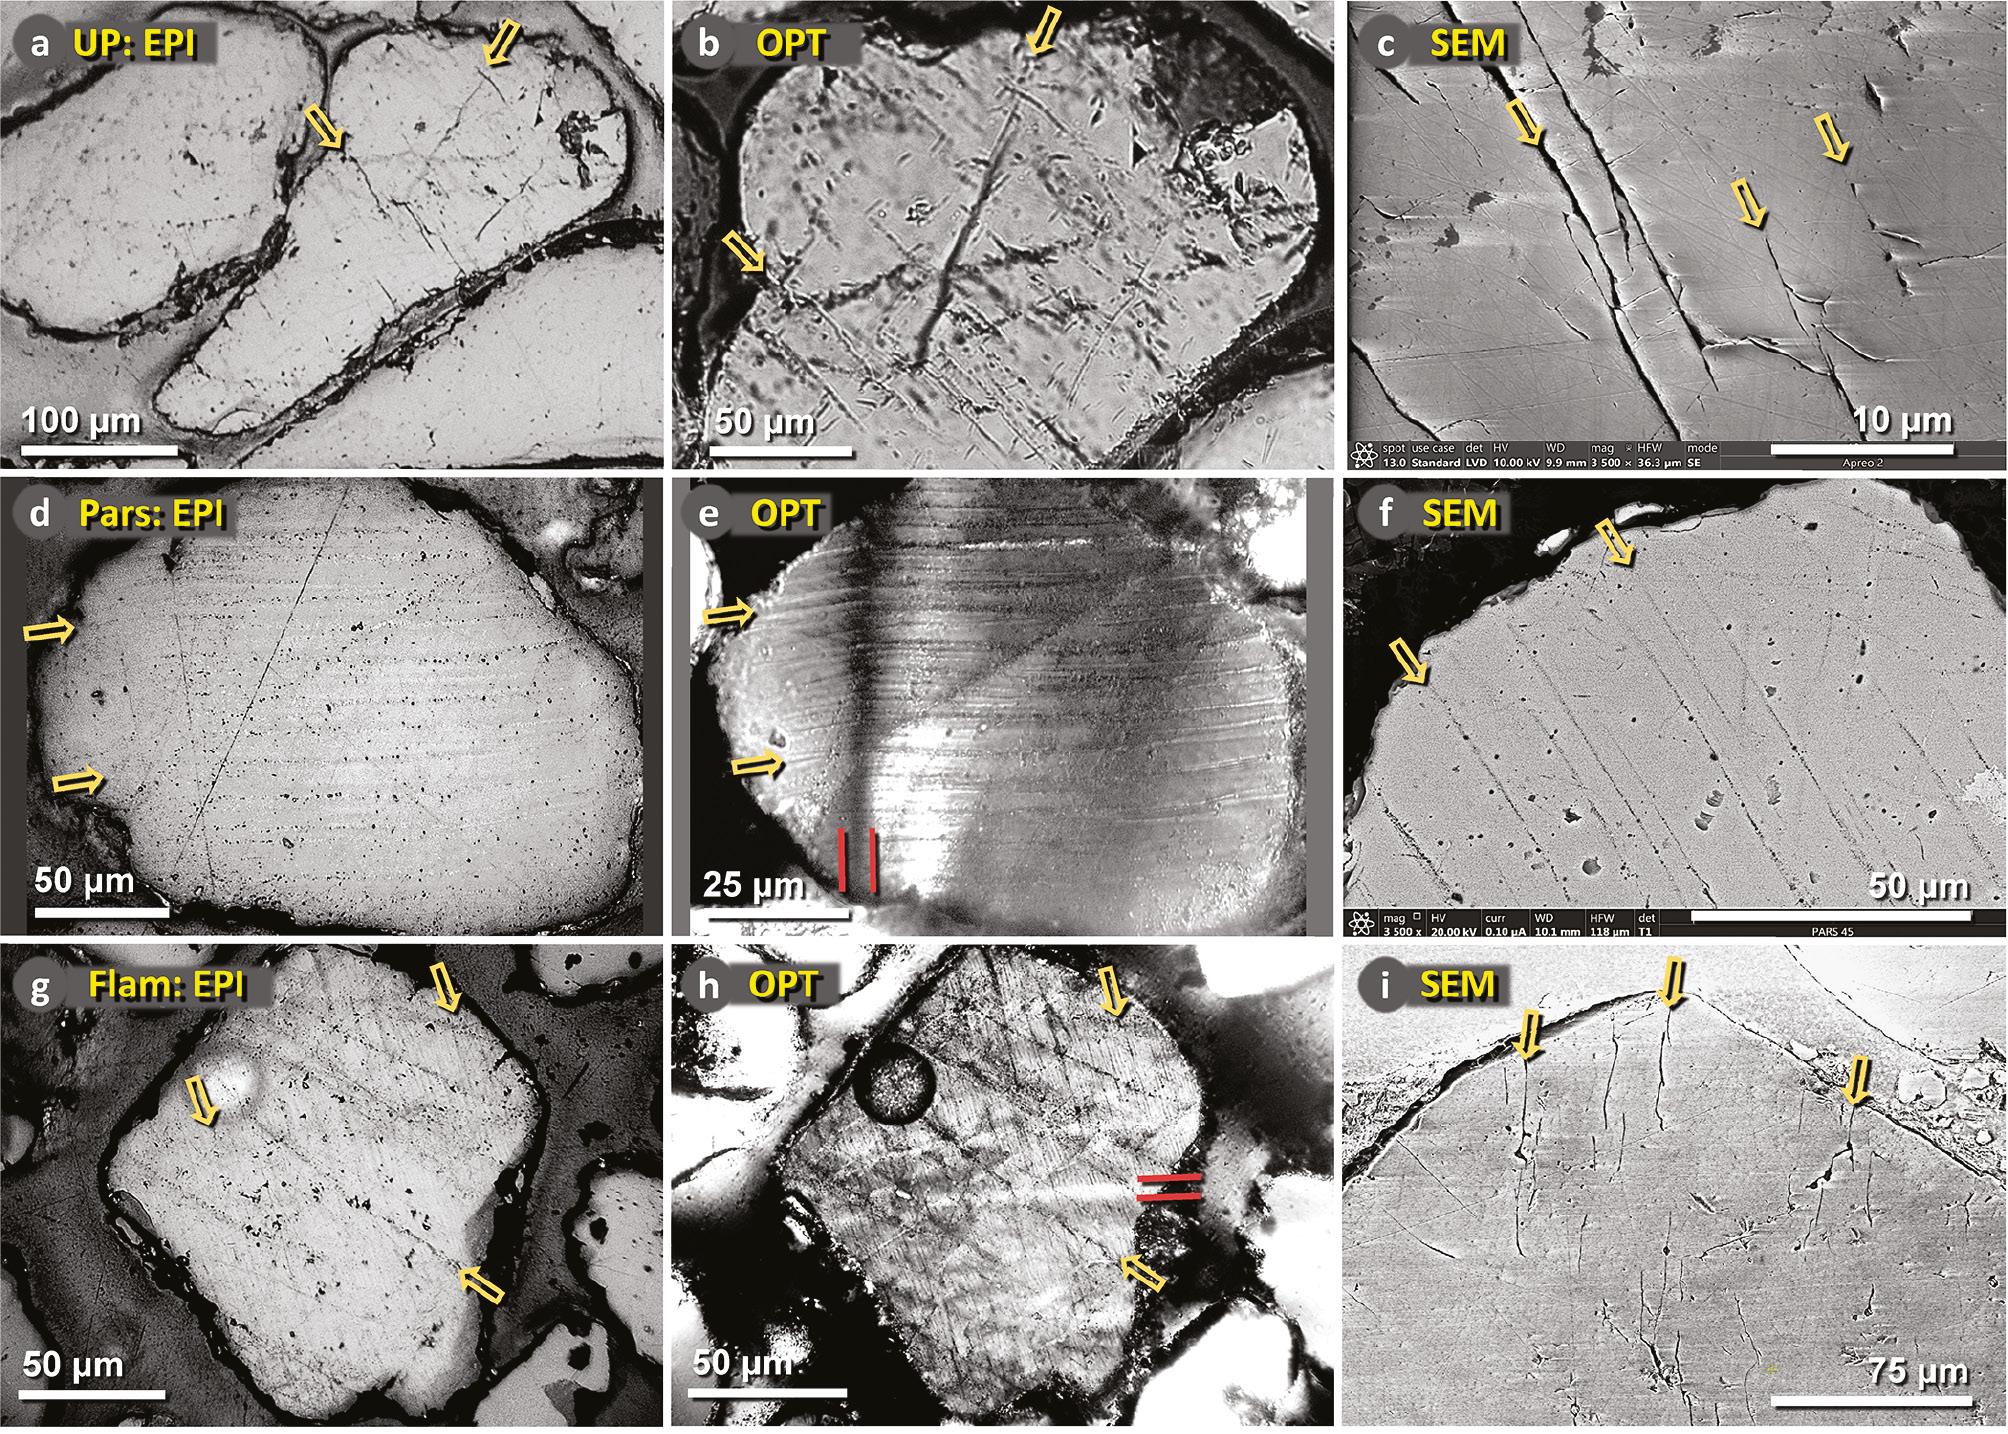 Shock-fractured quartz grains from Newtonville Site (a-c), Parsons Island Site (d-f), and Flamingo Bay (g-i). Images were acquired using optical microscopy and SEM. Yellow arrows identify selected shock fractures. Visible fractures were subsequently determined by EBSD and TEM to contain amorphous silica. In panels e and h, the red bars mark selected areas of undulose extinction that occur under crossed polarizers when different parts of the grain reach extinction at different polarities. This optical phenomenon commonly results from heterogeneous distortion of the crystal’s lattice by mechanical or thermal stress. (a) Newtonville (UP-11–13 cmbd) 23x13; epi-illuminated microscope (EPI) image. (b) Newtonville (UP-11–13 cmbd) quartz grain 23x13; transmitted-light optical microscope (OPT) image. (c) Newtonville (UP-11–13 cmbd) 23x13; secondary electron scanning electron microscope (SEM) image. (d) Pars-45 quartz grain 22x12; EPI image. (e) Pars-45 quartz grain 22x12; OPT image under crossed polars, rotated slightly off maximum for greater visibility. (f) Pars-45 quartz grain 22x12; backscatter electron scanning electron microscope (SEM-BSE) image. (g) Flam-52.5 quartz grain 33x-07; EPI image. (h) Flam-52.5 quartz grain 33x-07; OPT image under crossed polars, rotated slightly off maximum for better visibility. (i) Flam-52.5 quartz grain 20x12; SEM-BSE image.